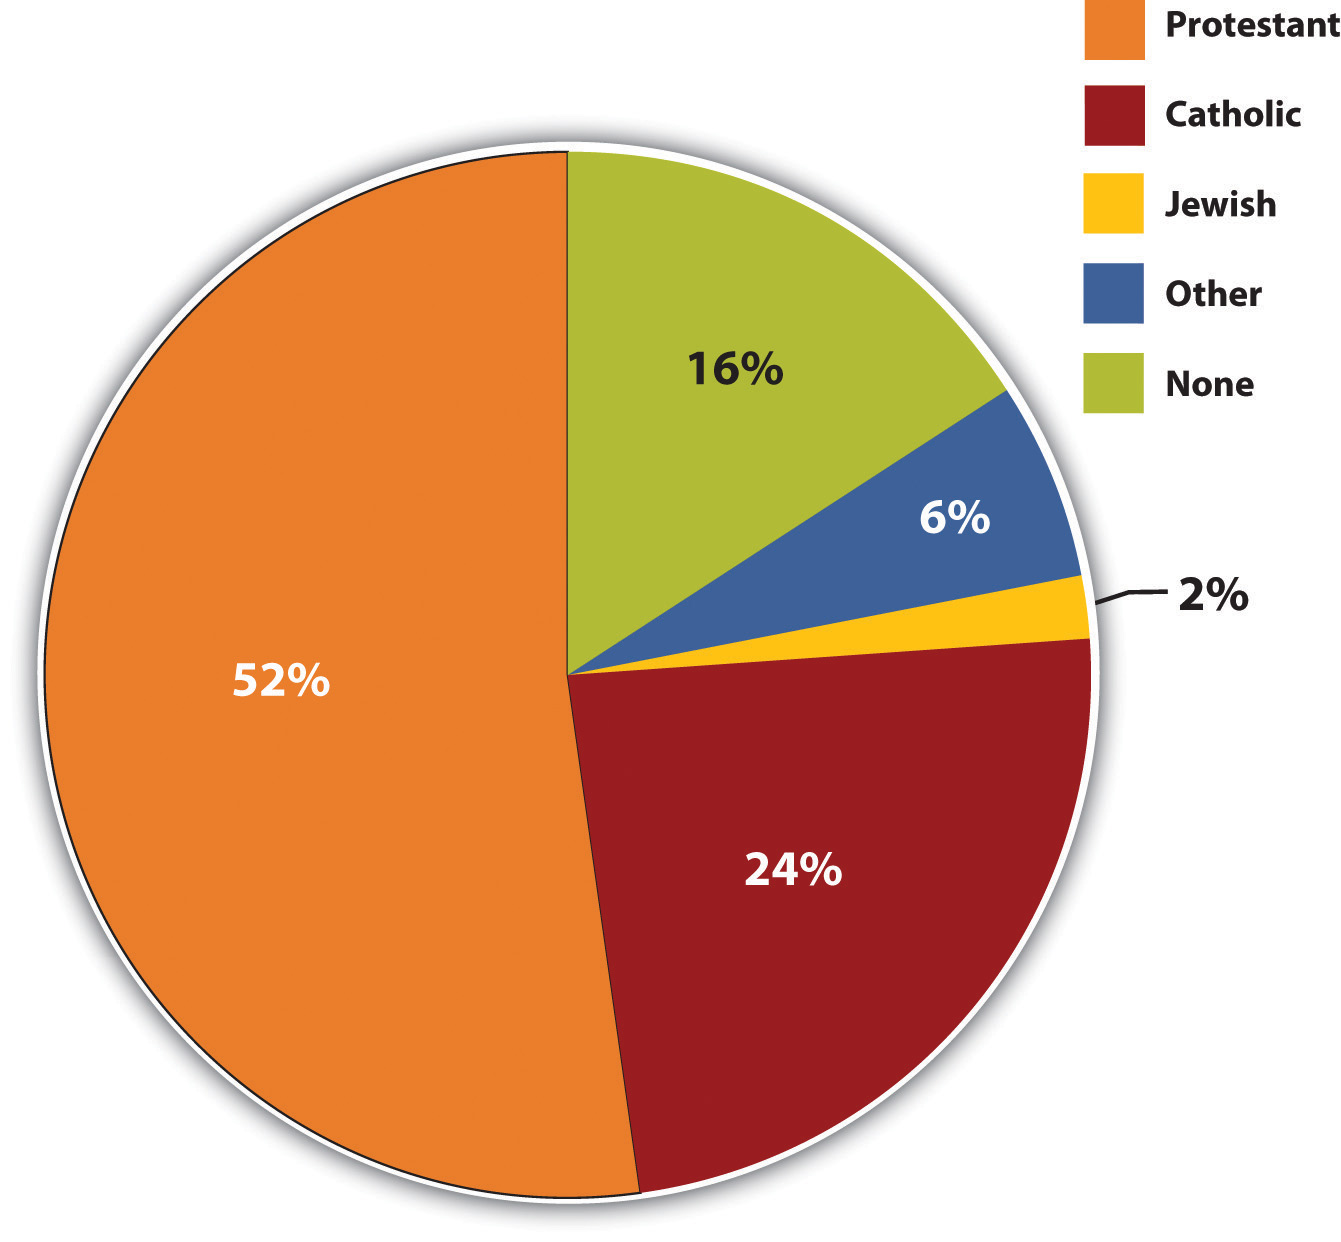 Religious Preference in the United States: 52% protestant, 24% catholic, 16% non, 6% other, and 2% jewish